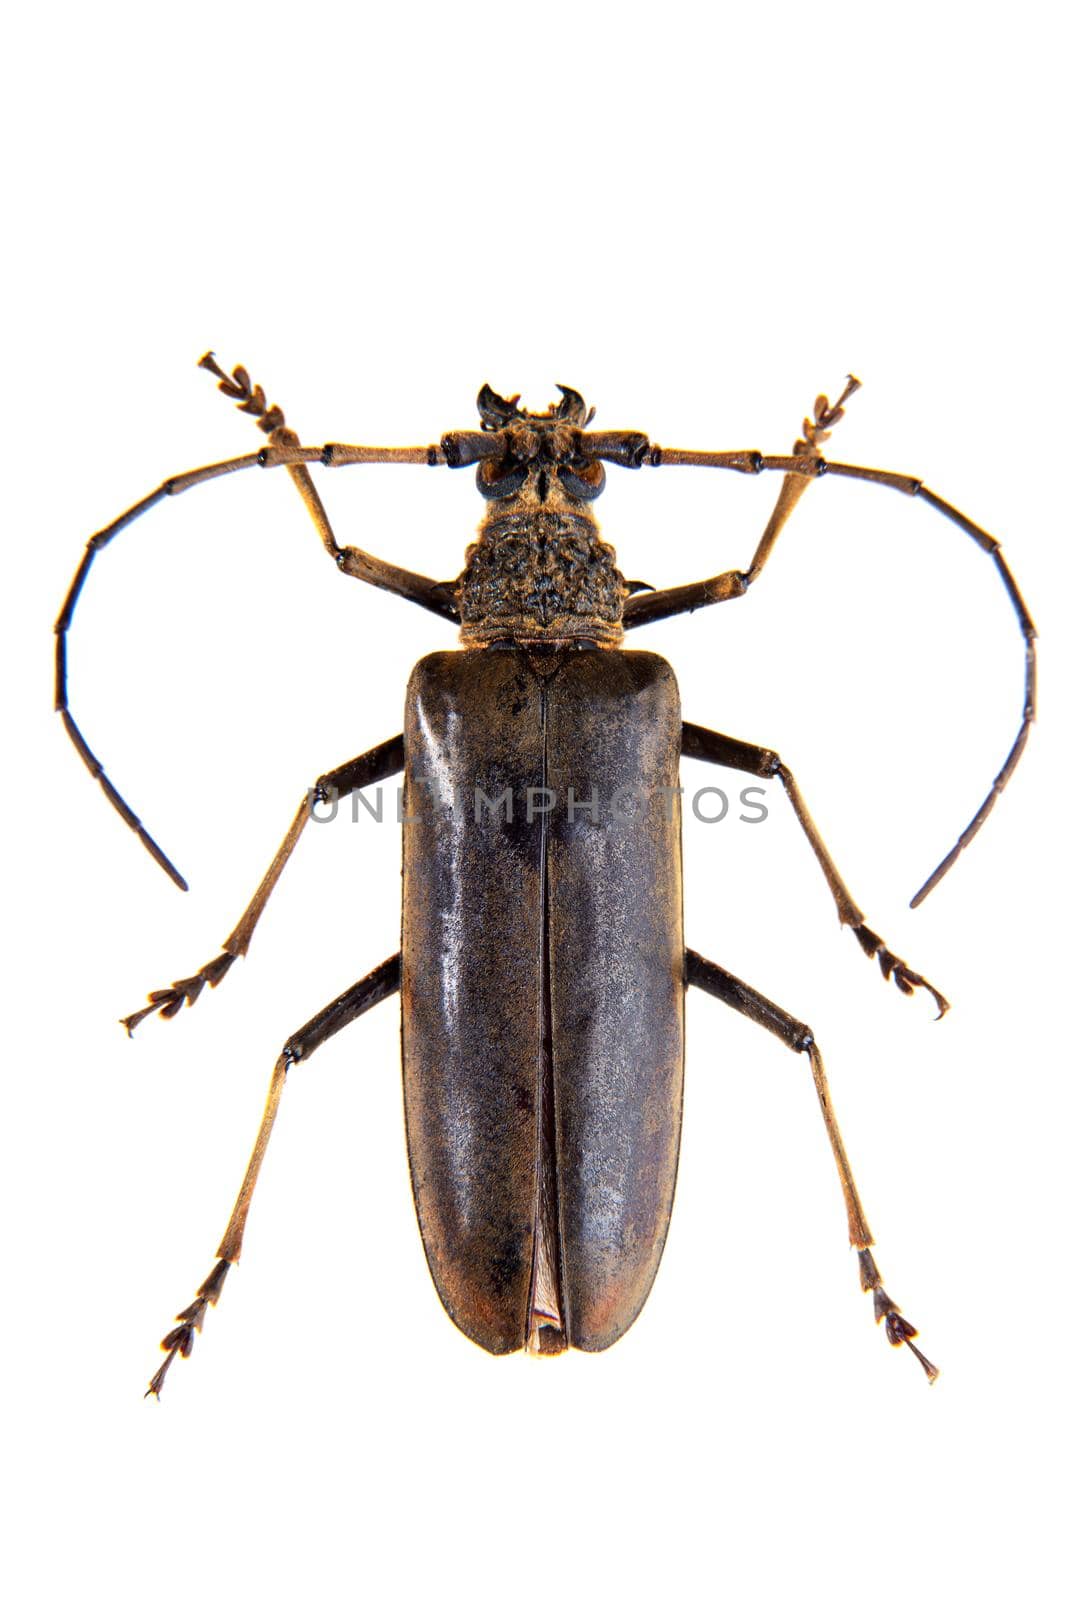 The Pine sawyer beetle in museum isolated on the white background